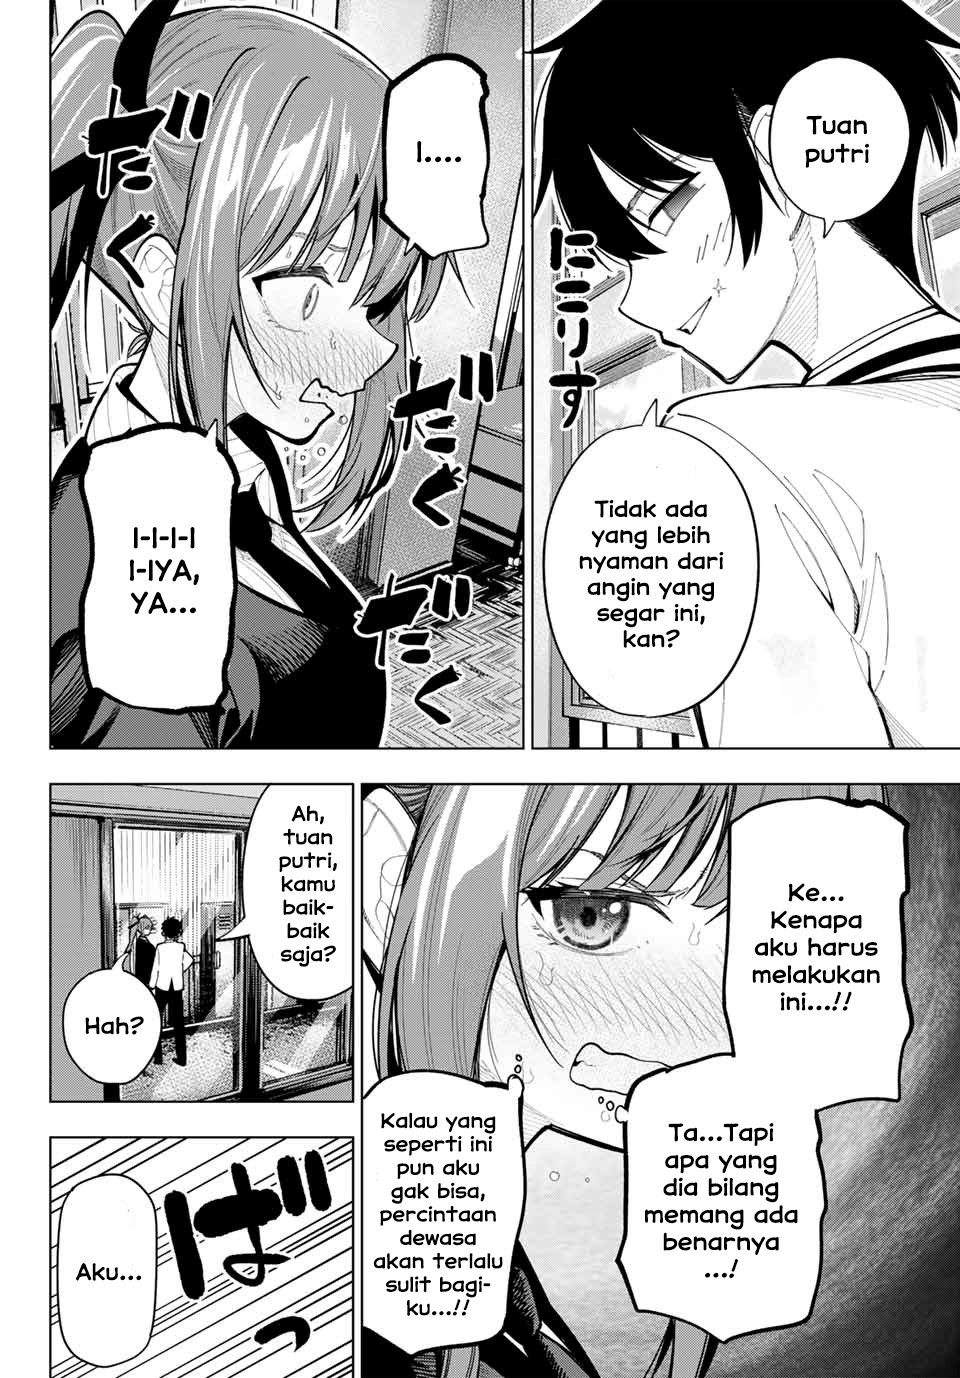 Mayonaka Heart Tune (Tune In to the Midnight Heart) Chapter 04 Image 18